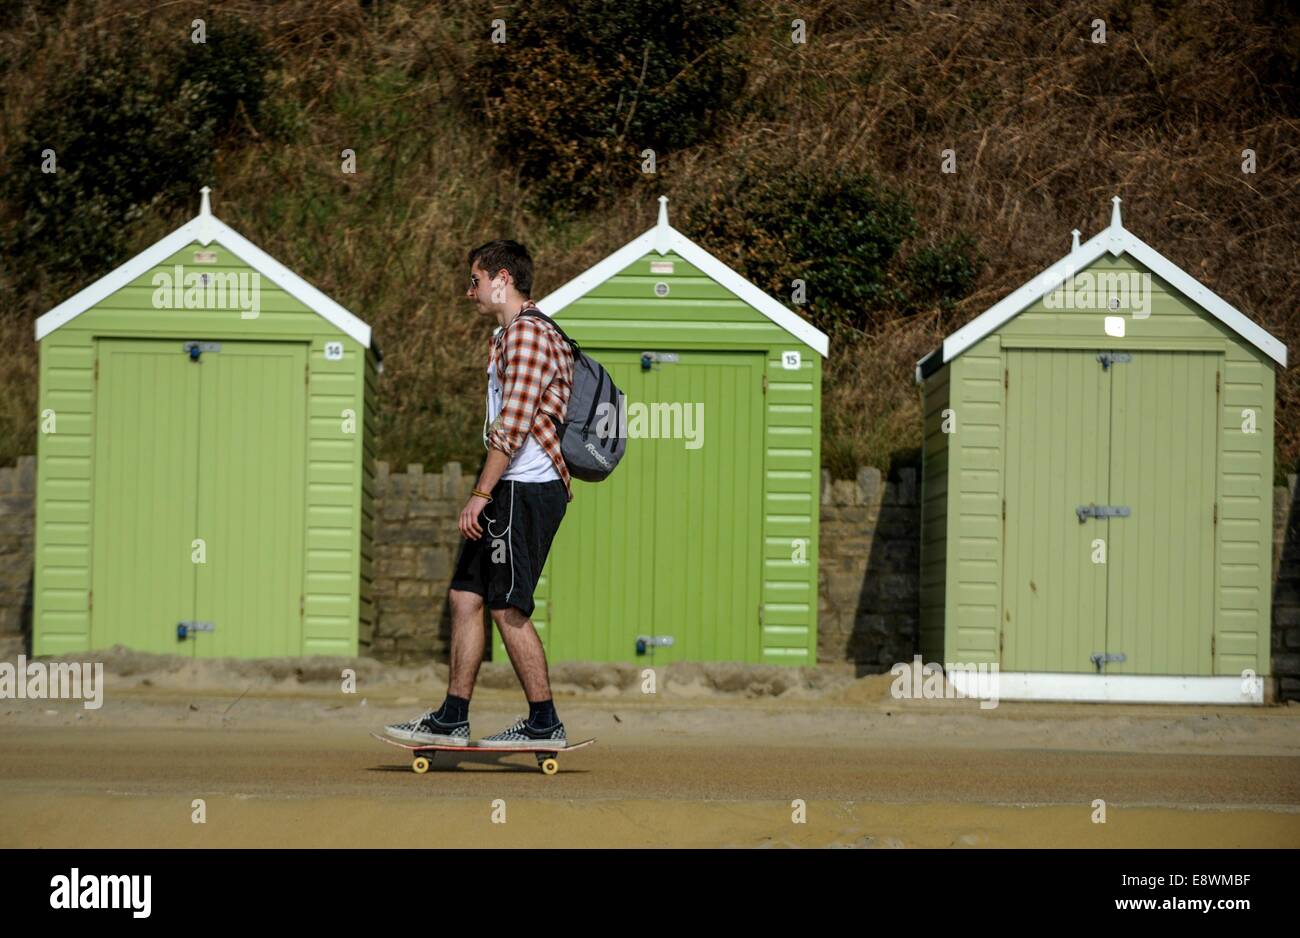 A man is seen skateboarding past a row of beach huts beside the beach in Bournemouth, England Stock Photo